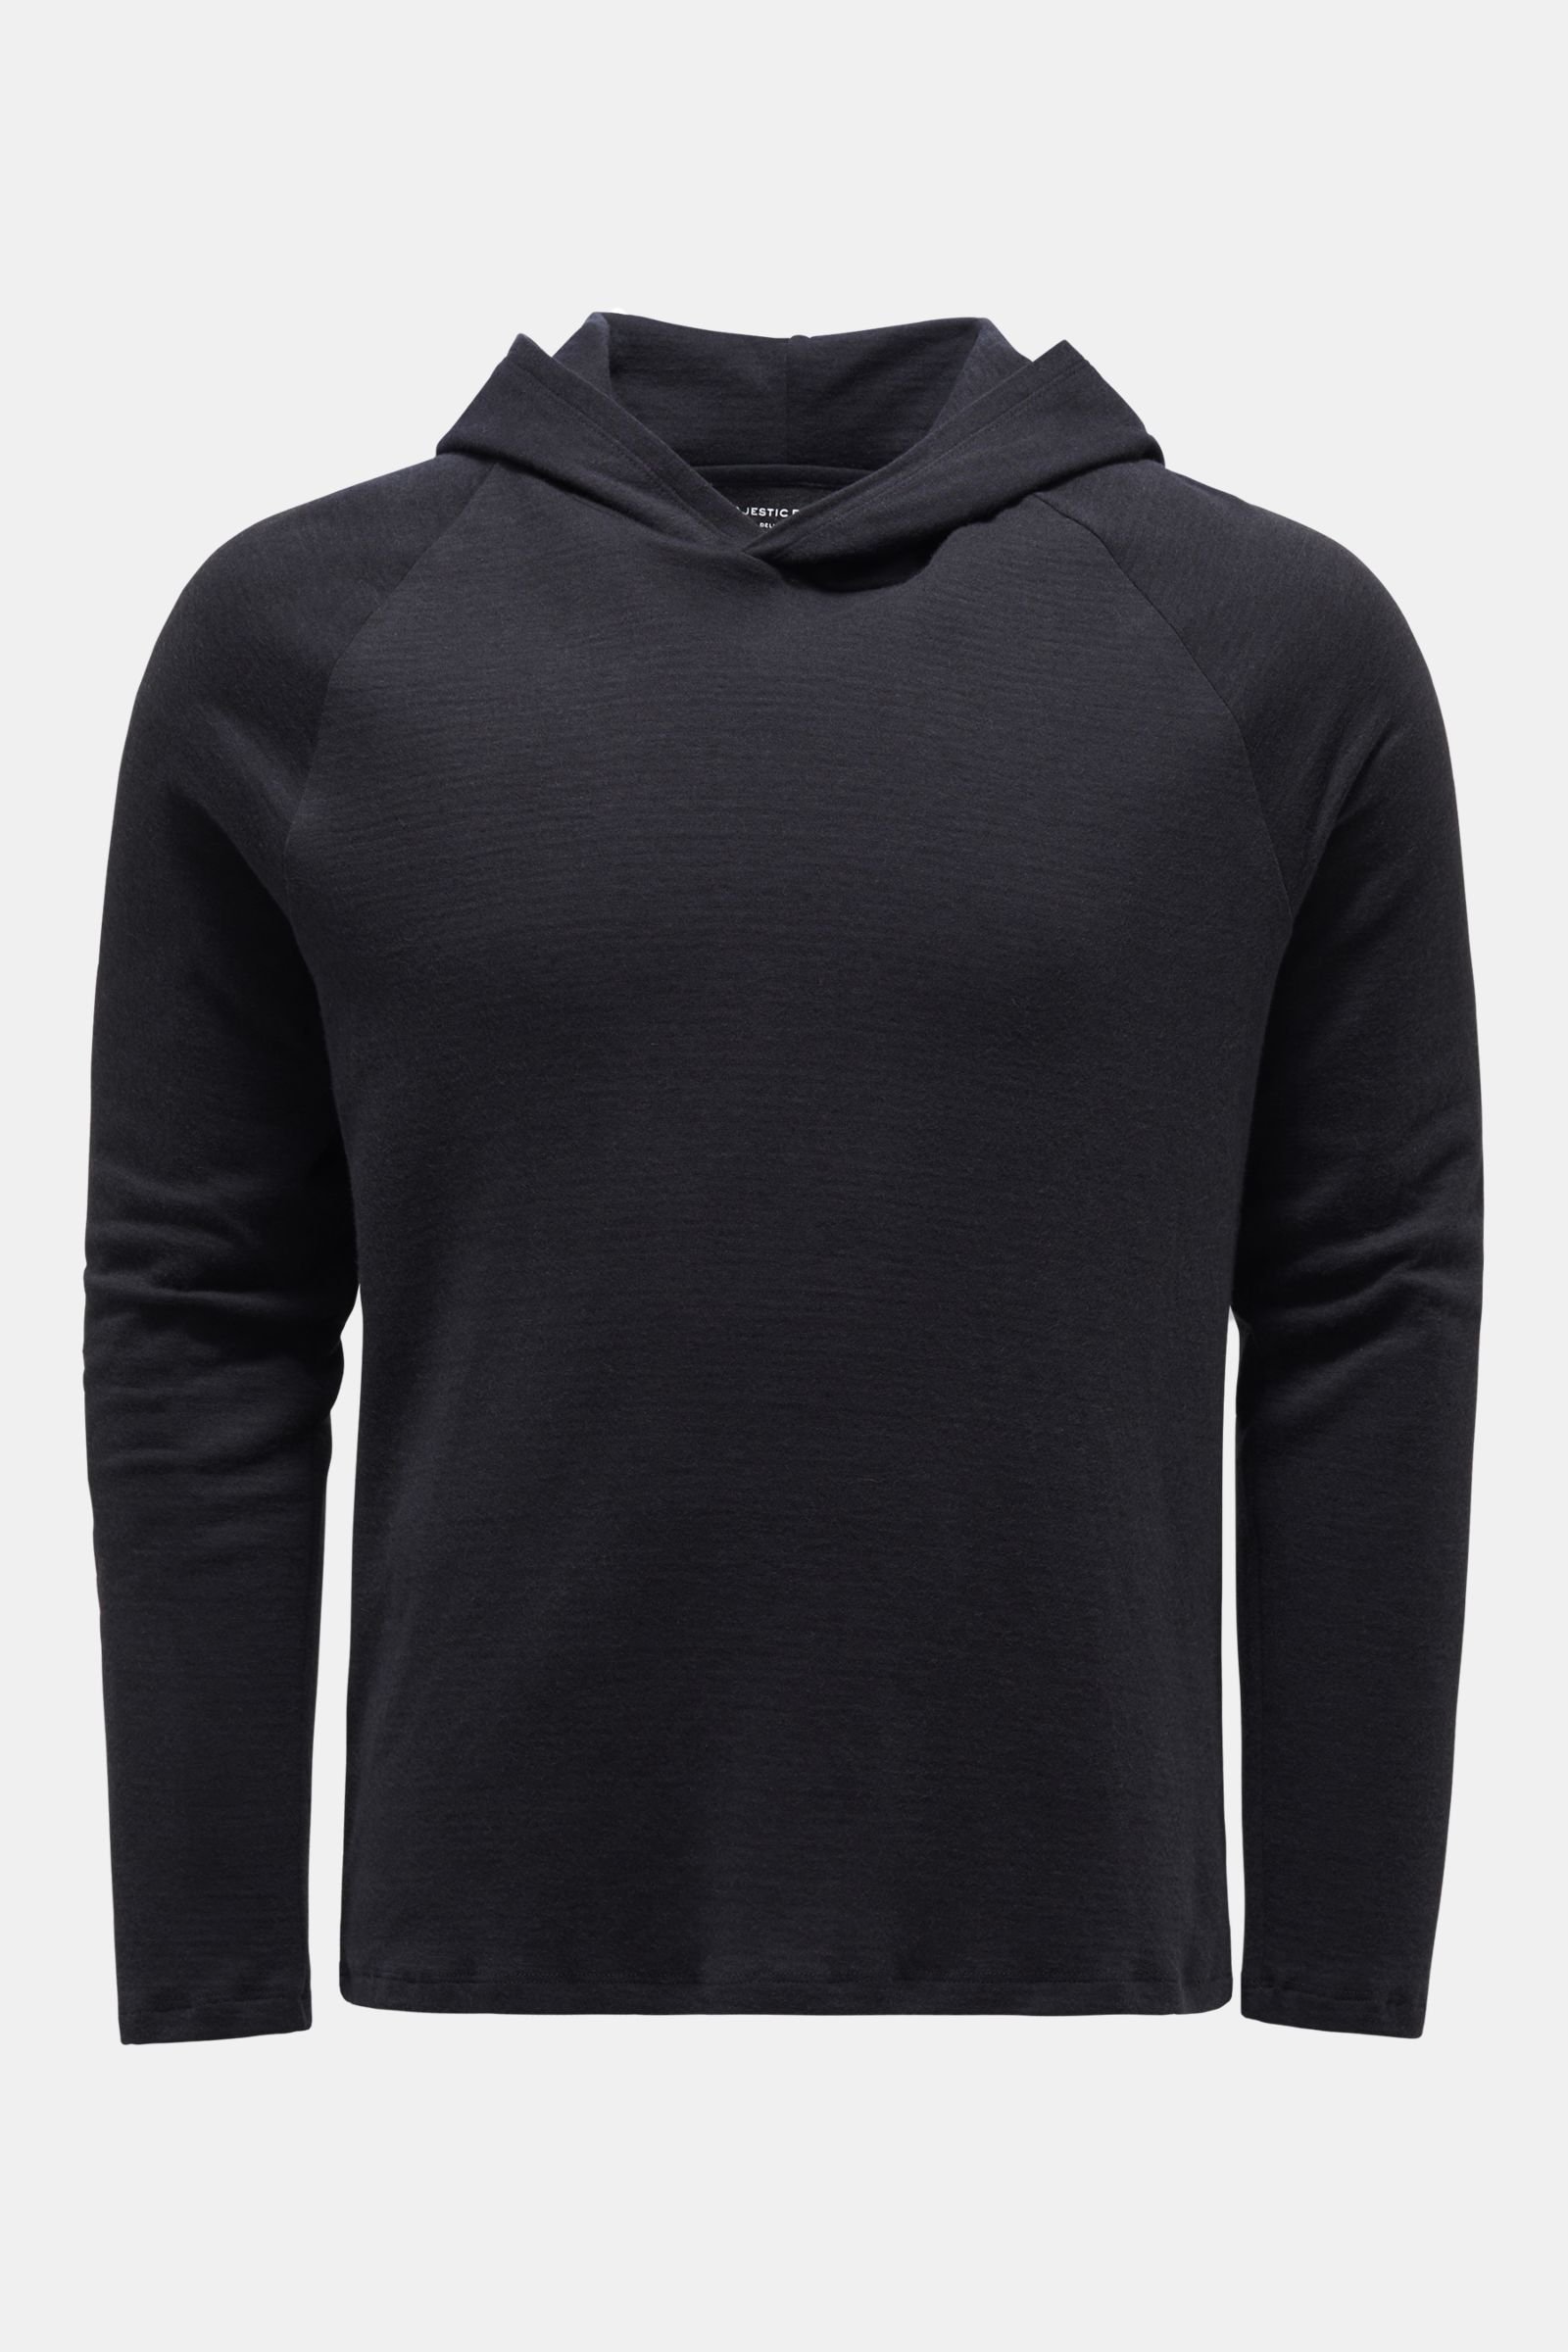 Long sleeve anthracite